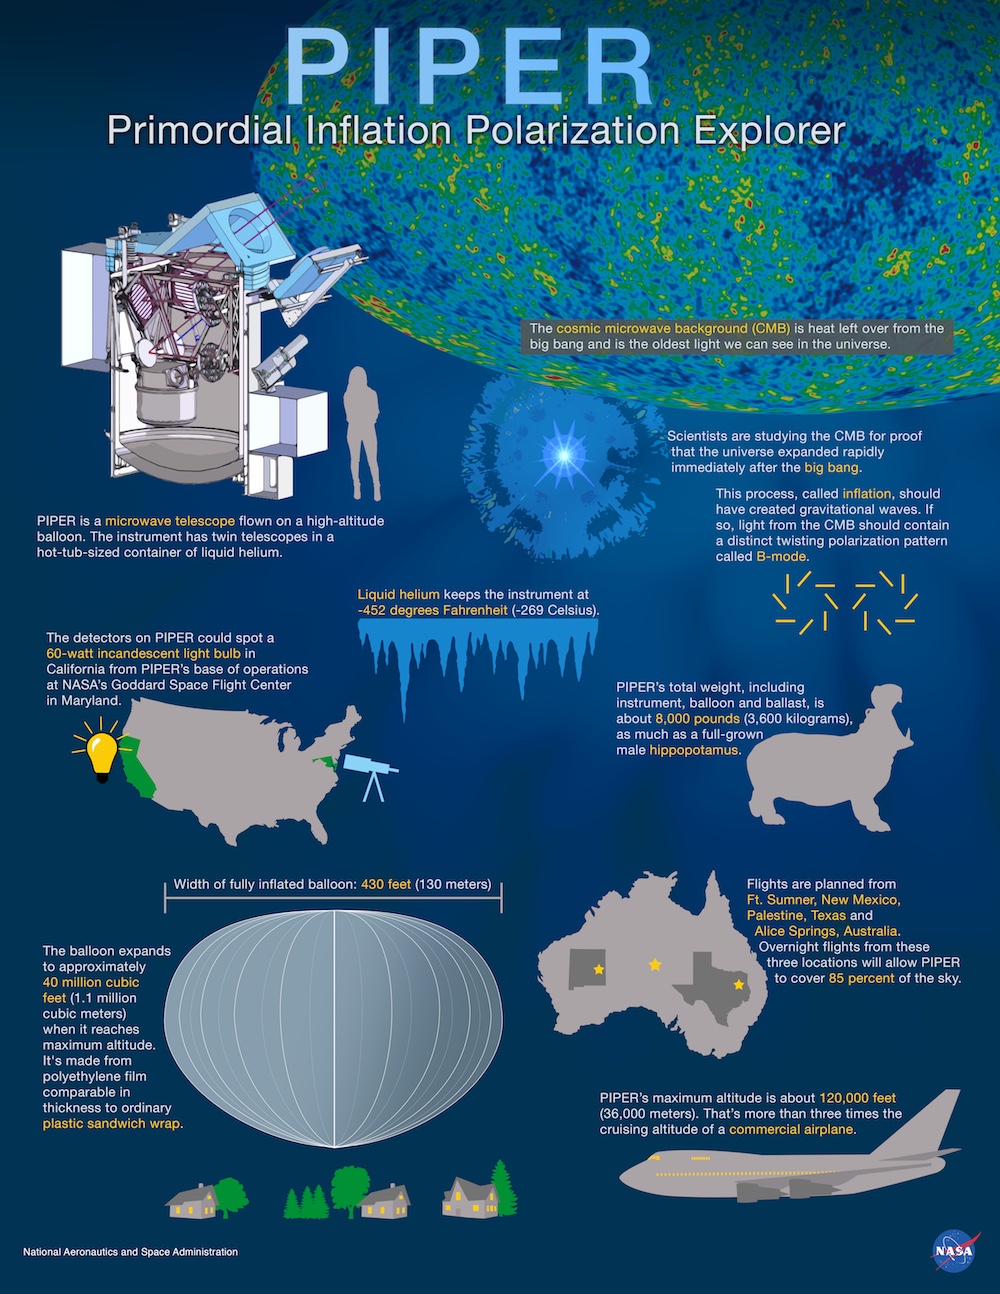 This infographic shows many factoids about the PIPER (Primordial Inflation Polarization Explorer) balloon mission. At the top, there is part of an image of the cosmic microwave background with the text, “The cosmic microwave background (CMB) is heat left over from the big bang and is the oldest light we can see in the universe.” Just below that, near a circular, bright “explosion” is the text, “Scientists are studying the CMB for proof that the universe expanded rapidly immediately after the big bang.” Next is an image of two circles of yellow lines that look like 8-pointed pinwheels that would swirls in opposite directions with text, “This process, called inflation, should have created gravitational waves. If so, light from the CMB should contain a distinct twisting polarization pattern called B-mode.” There is a cut-out line drawing of the PIPER payload with the silhouette of a person standing next to it, showing that it is about two persons’ high. The text says, “PIPER is a microwave telescope flown on a high-altitude balloon. The instrument has twin telescopes in a hot-tub-sized container of liquid helium.” Next there is text with icicles below it that reads, “Liquid helium keeps the instrument at -452 degrees Fahrenheit (-269 Celsius).” Near a map of the United States with a telescope by Maryland and a lightbulb near California is the text, “The detectors on PIPER could spot a 60-watt incandescent light bulb in California from PIPER's base of operations at NASA's Goddard Space Flight Center in Maryland.” A silhouette of a hippopotamus accompanies the text, “PIPER's total weight, including instrument, balloon and ballast, is about 8,000 pounds (3,600 kilograms), as much as a full-grown male hippopotamus.” An illustration of the fully inflated balloon appears with the text, “Width of fully inflated balloon: 430 feet (130 meters).” Underneath the balloon are three houses. The text nearby explains, “The balloon expands to approximately 40 million cubic feet (1.1 million cubic meters) when it reaches maximum altitude. It's made from polyethylene film comparable in thickness to ordinary plastic sandwich wrap.” A drawing of Australia, Texas and New Mexico is accompanied by the text, “Flights are planned from Ft. Sumner, New Mexico, Palestine, Texas and Alice Springs, Australia. Overnight flights from these three locations will allow PIPER to cover 85 percent of the sky.” And finally, a commercial airplane near the bottom has text, “PIPER's maximum altitude is about 120,000 feet (36,000 meters). That's more than three times the cruising altitude of a commercial airplane.”